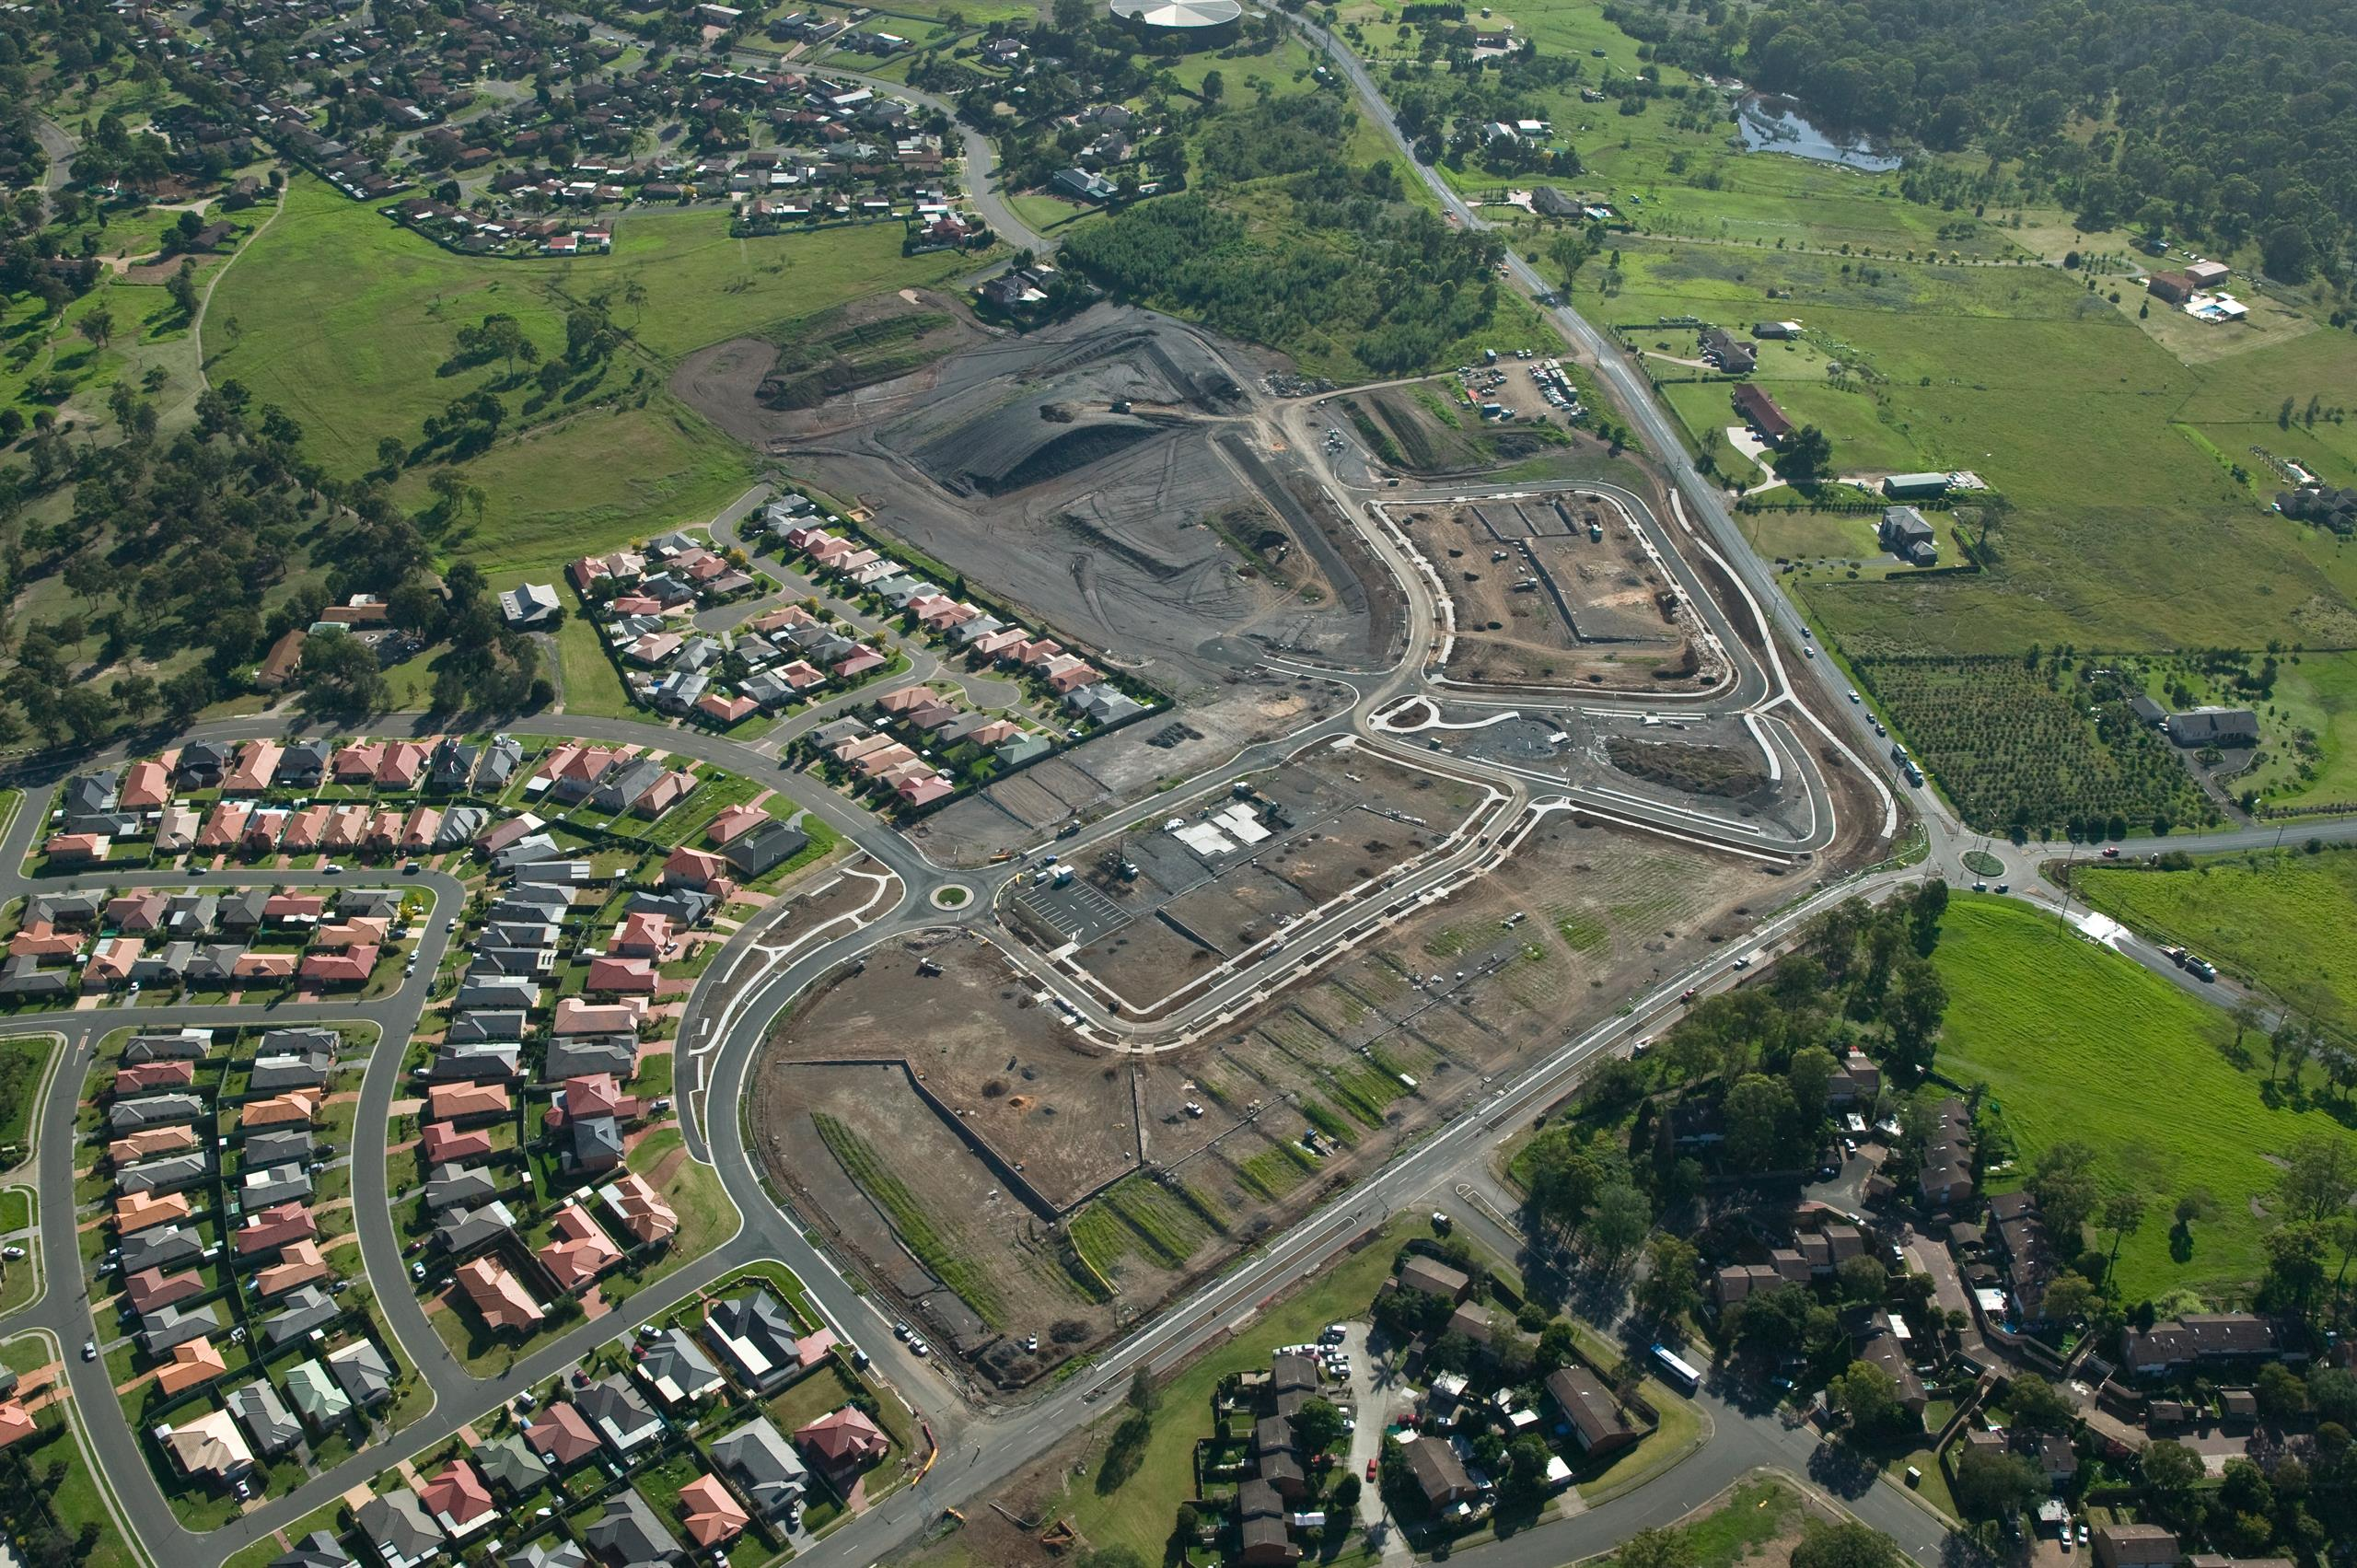 Minto urban renewal project involves the staged redevelopment of around 1,000 properties in the Minto public housing area in Sydney’s south west. The aim of the project is to renew the area so that it looks like neighbouring suburbs with a mix of public a